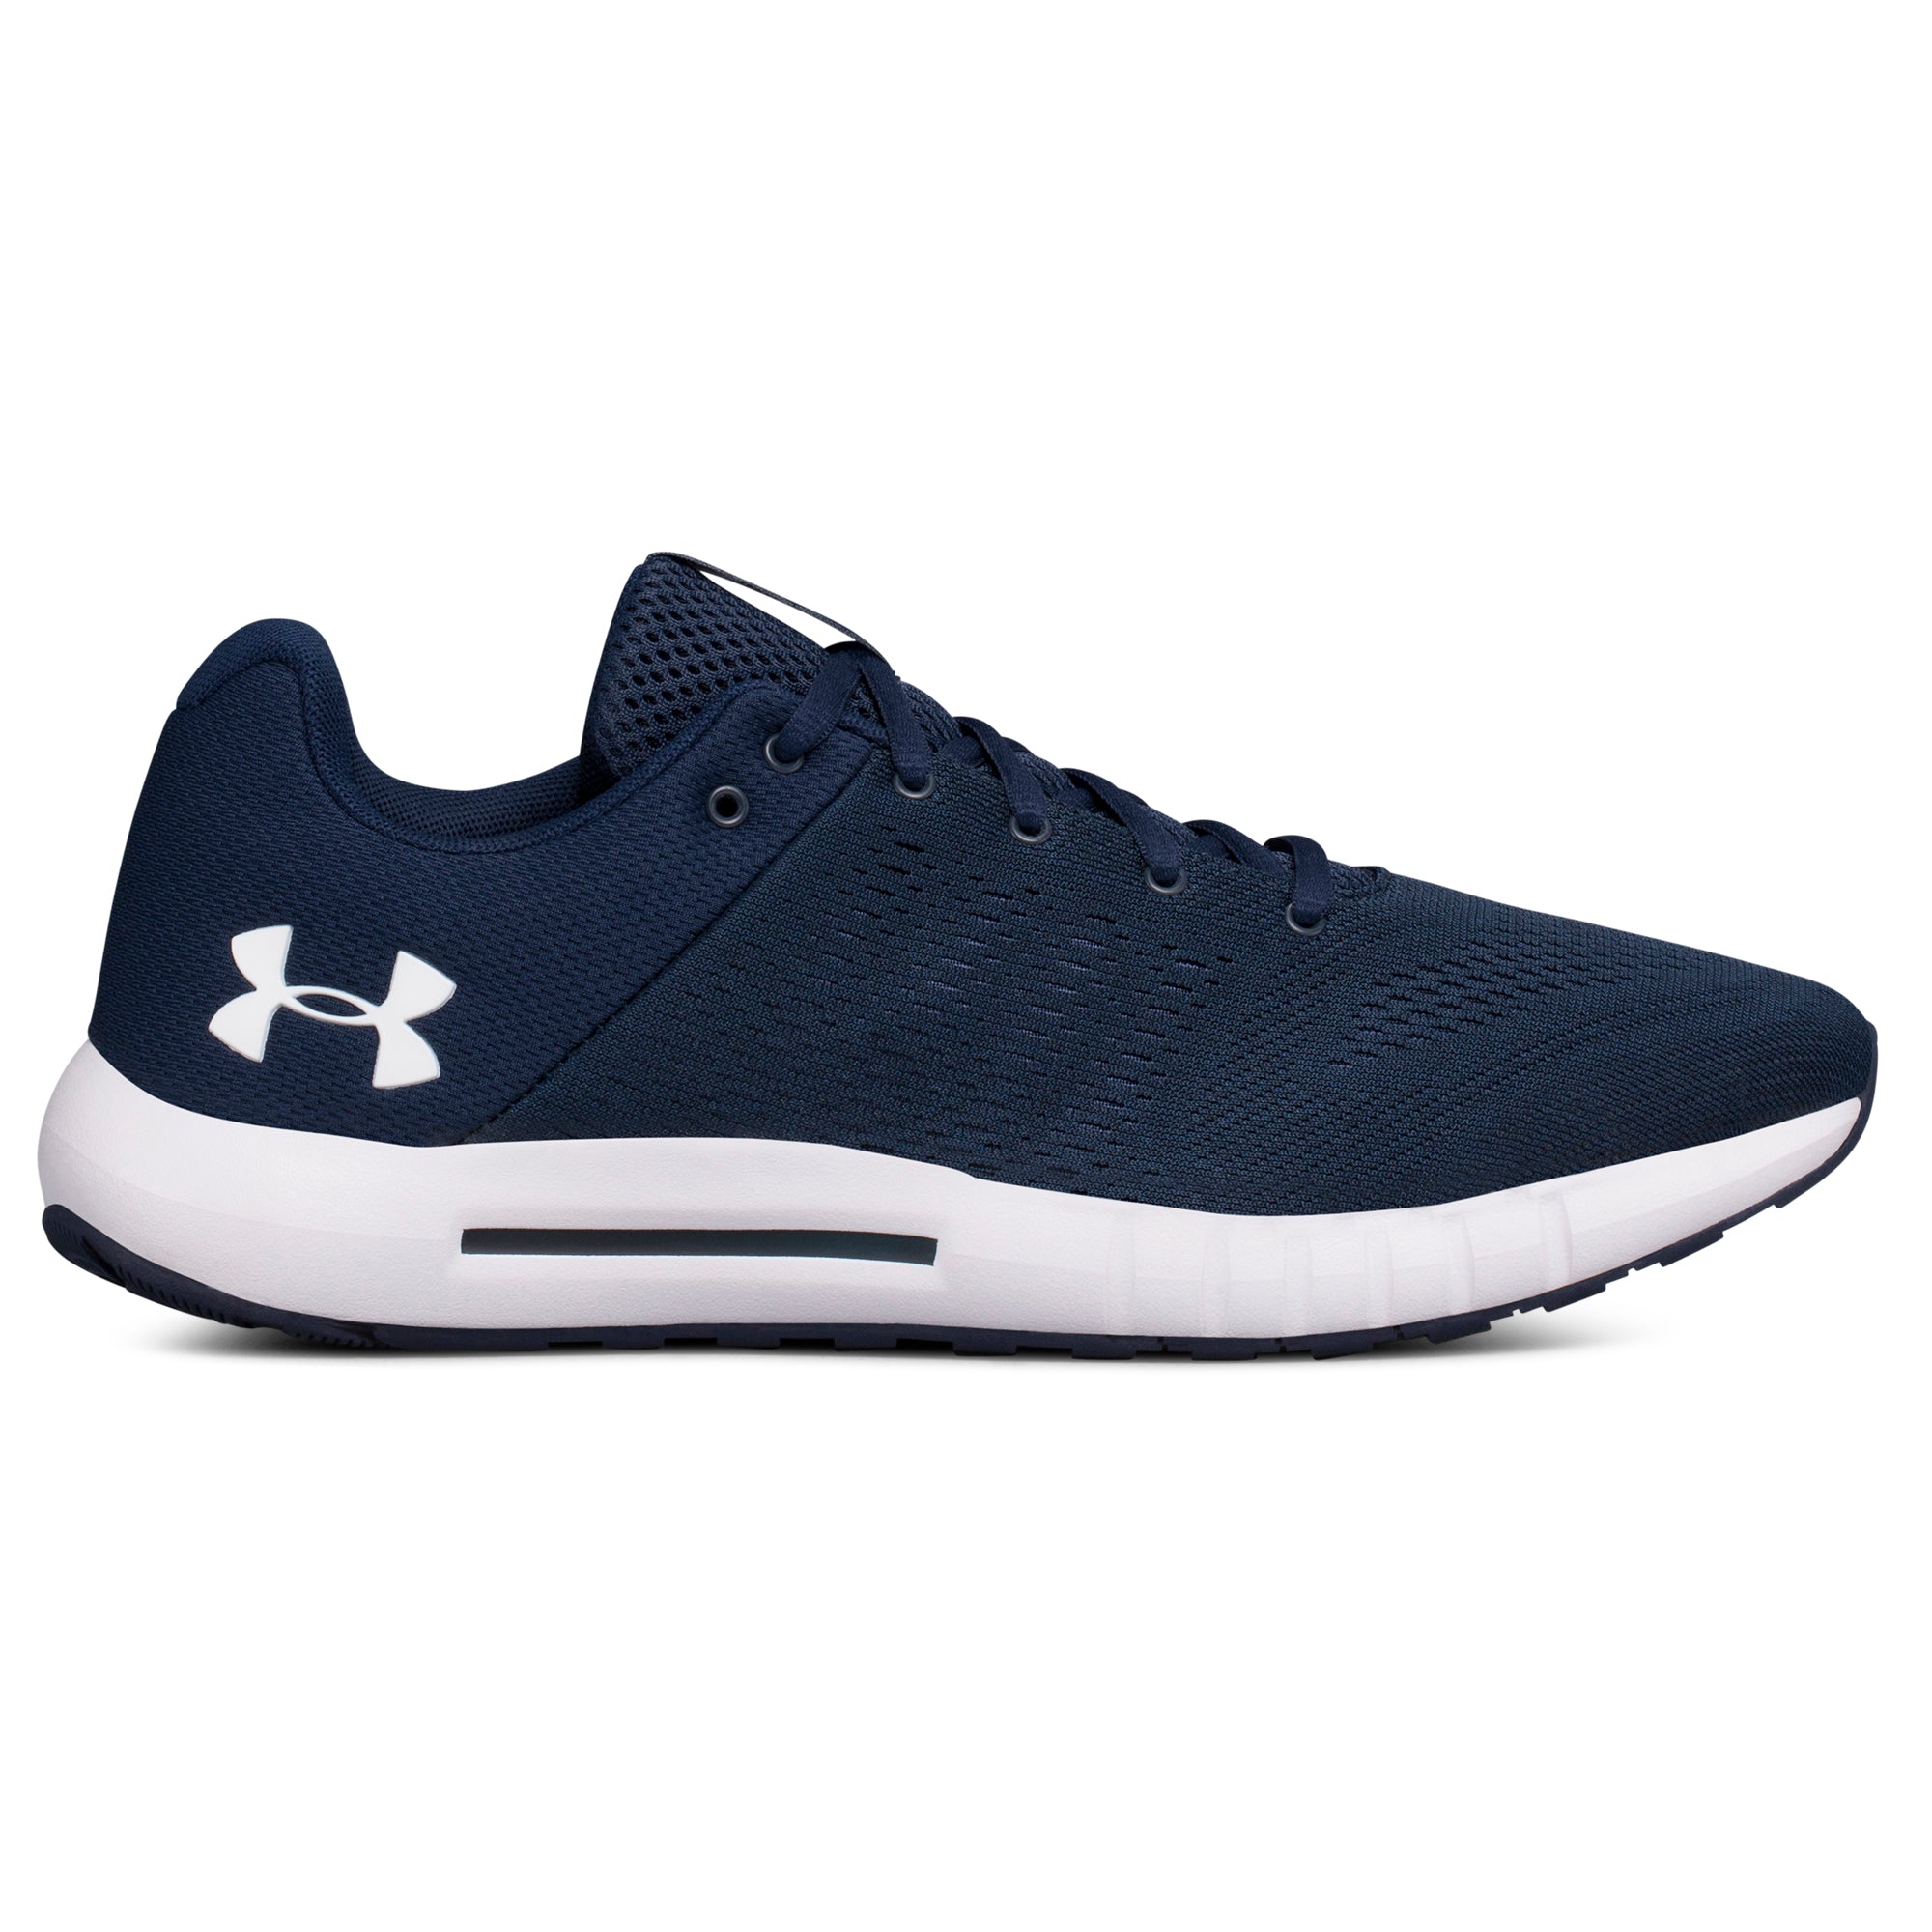 Under Armour • Under Armour Micro G Pursuit Navy Mens Running Shoes ...